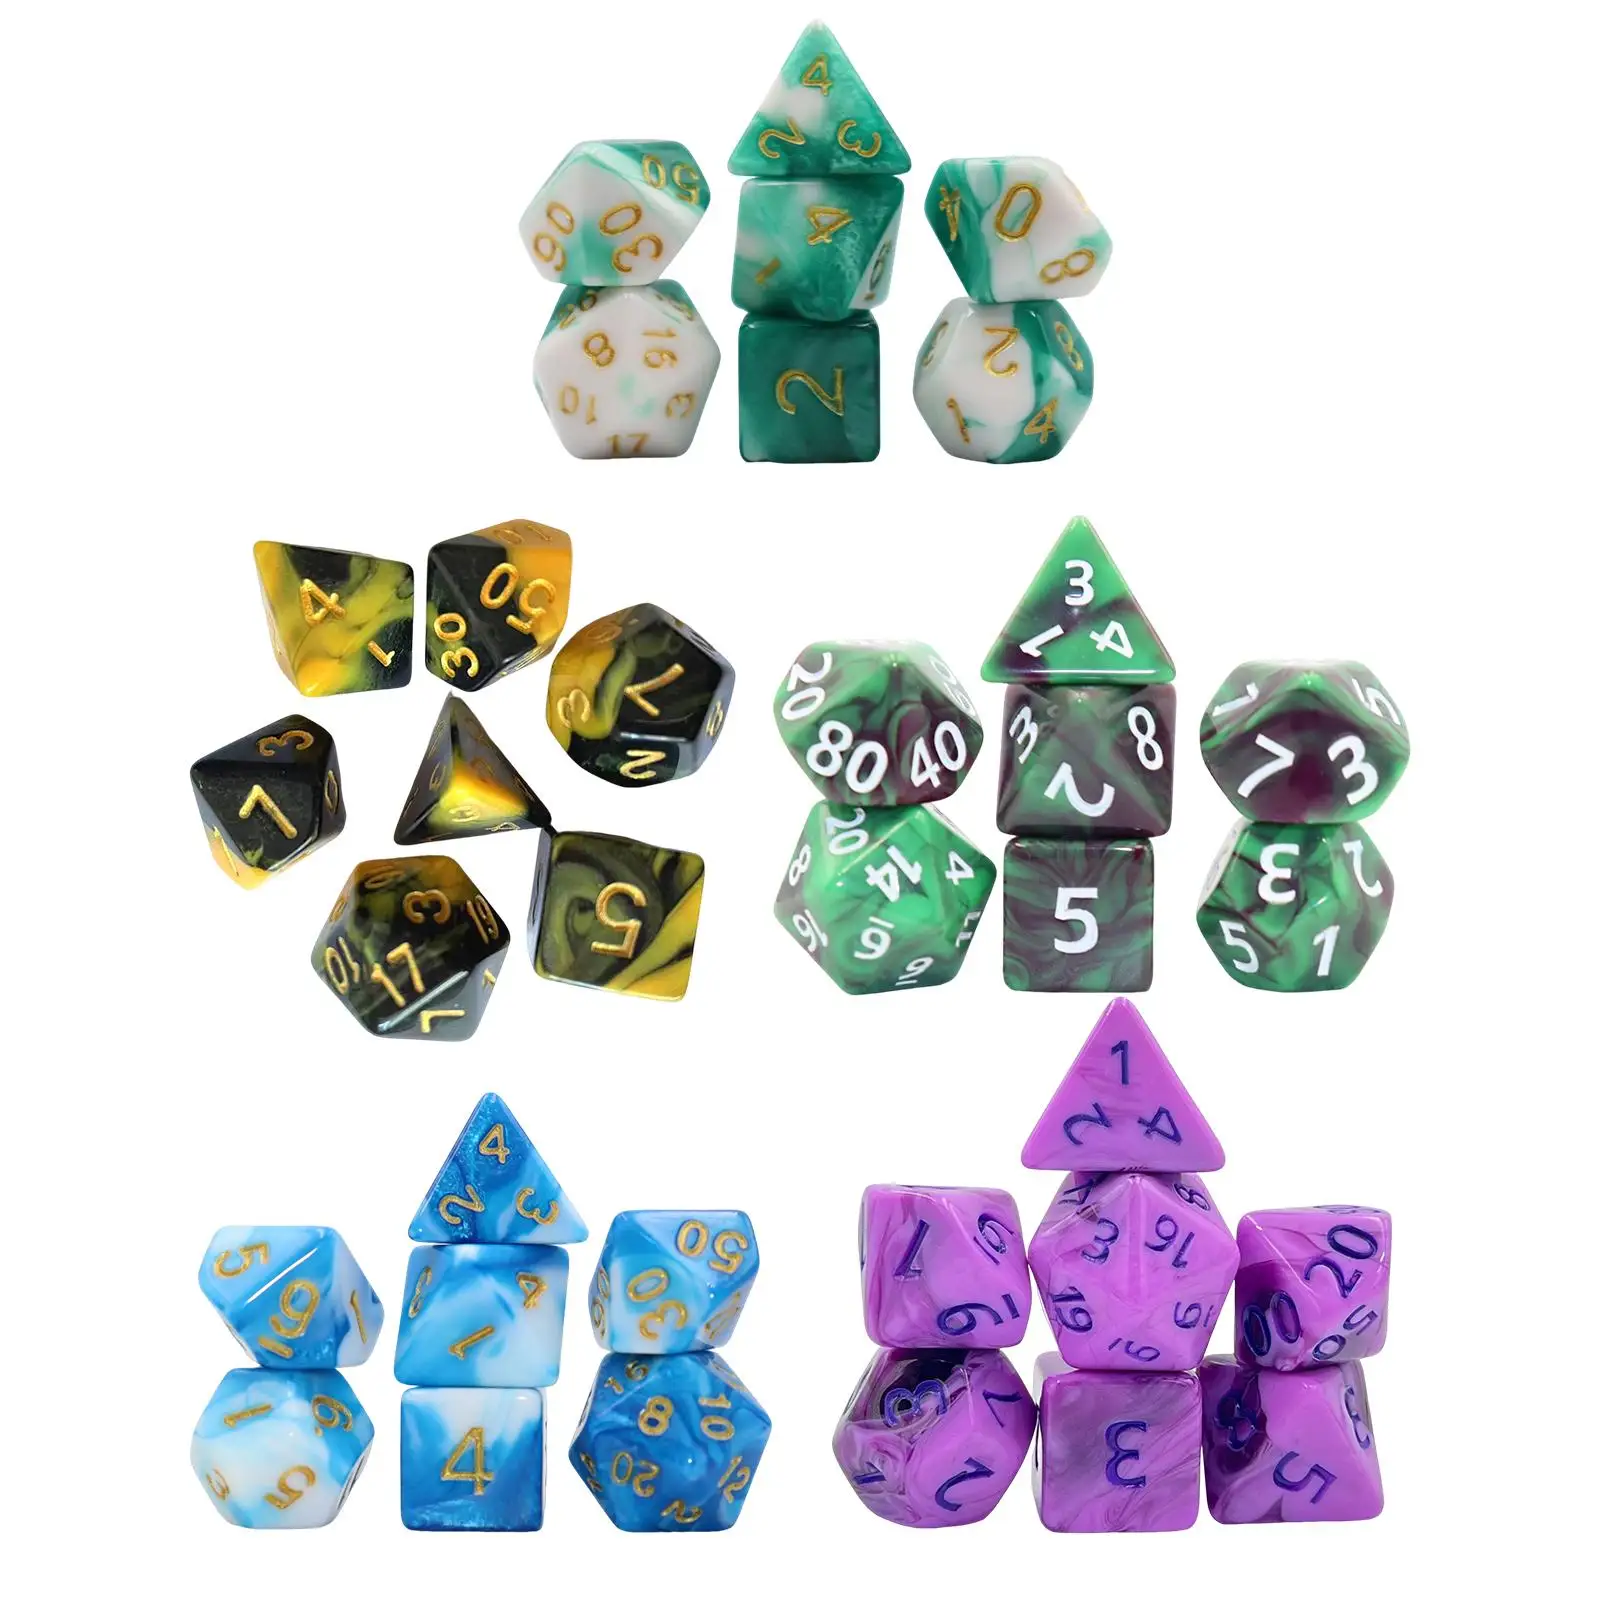 7Pcs Polyhedral Dices Set D4-D20 Acrylic Multi Dice Engraved Dices Puzzle Games Craft for RPG MTG Role Playing Table Board Games